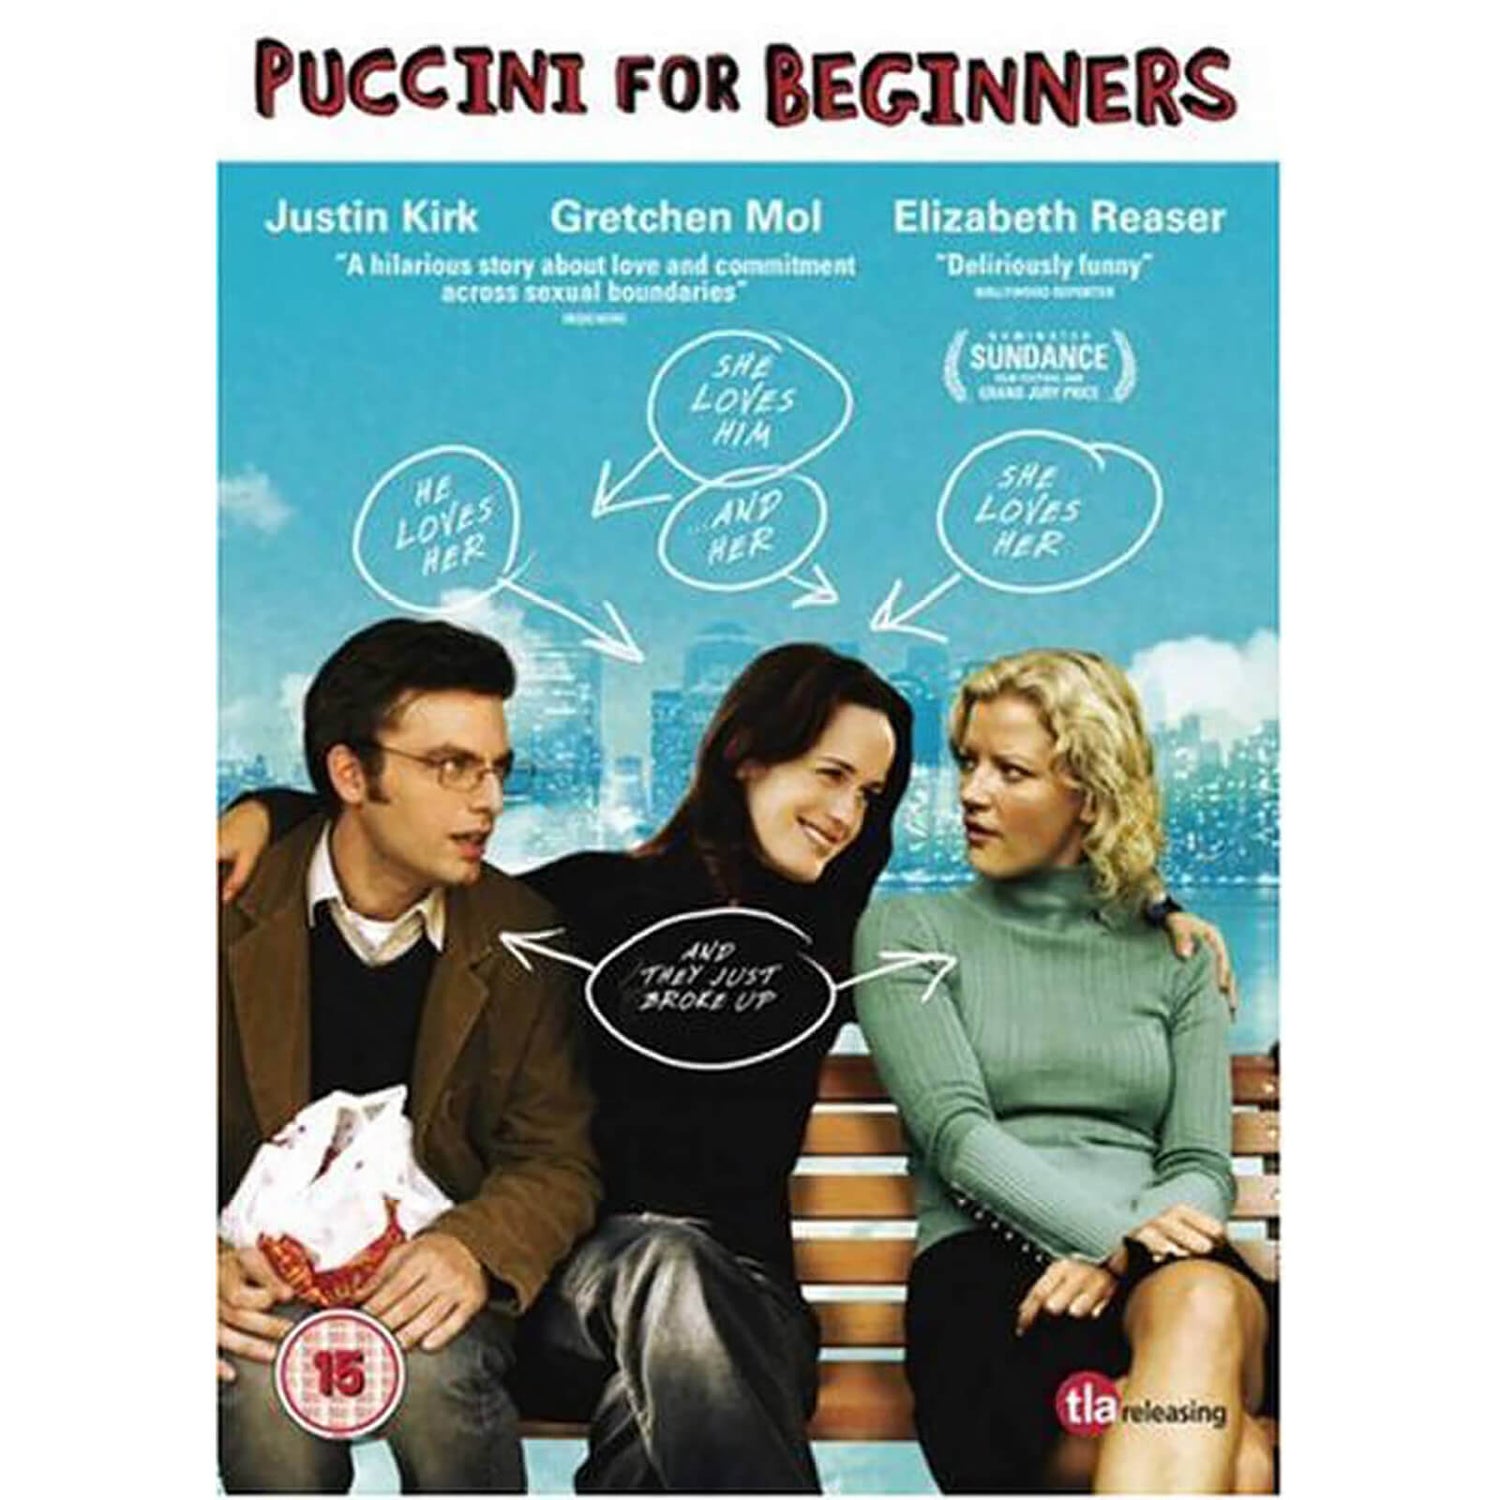 Puccini For Beginners